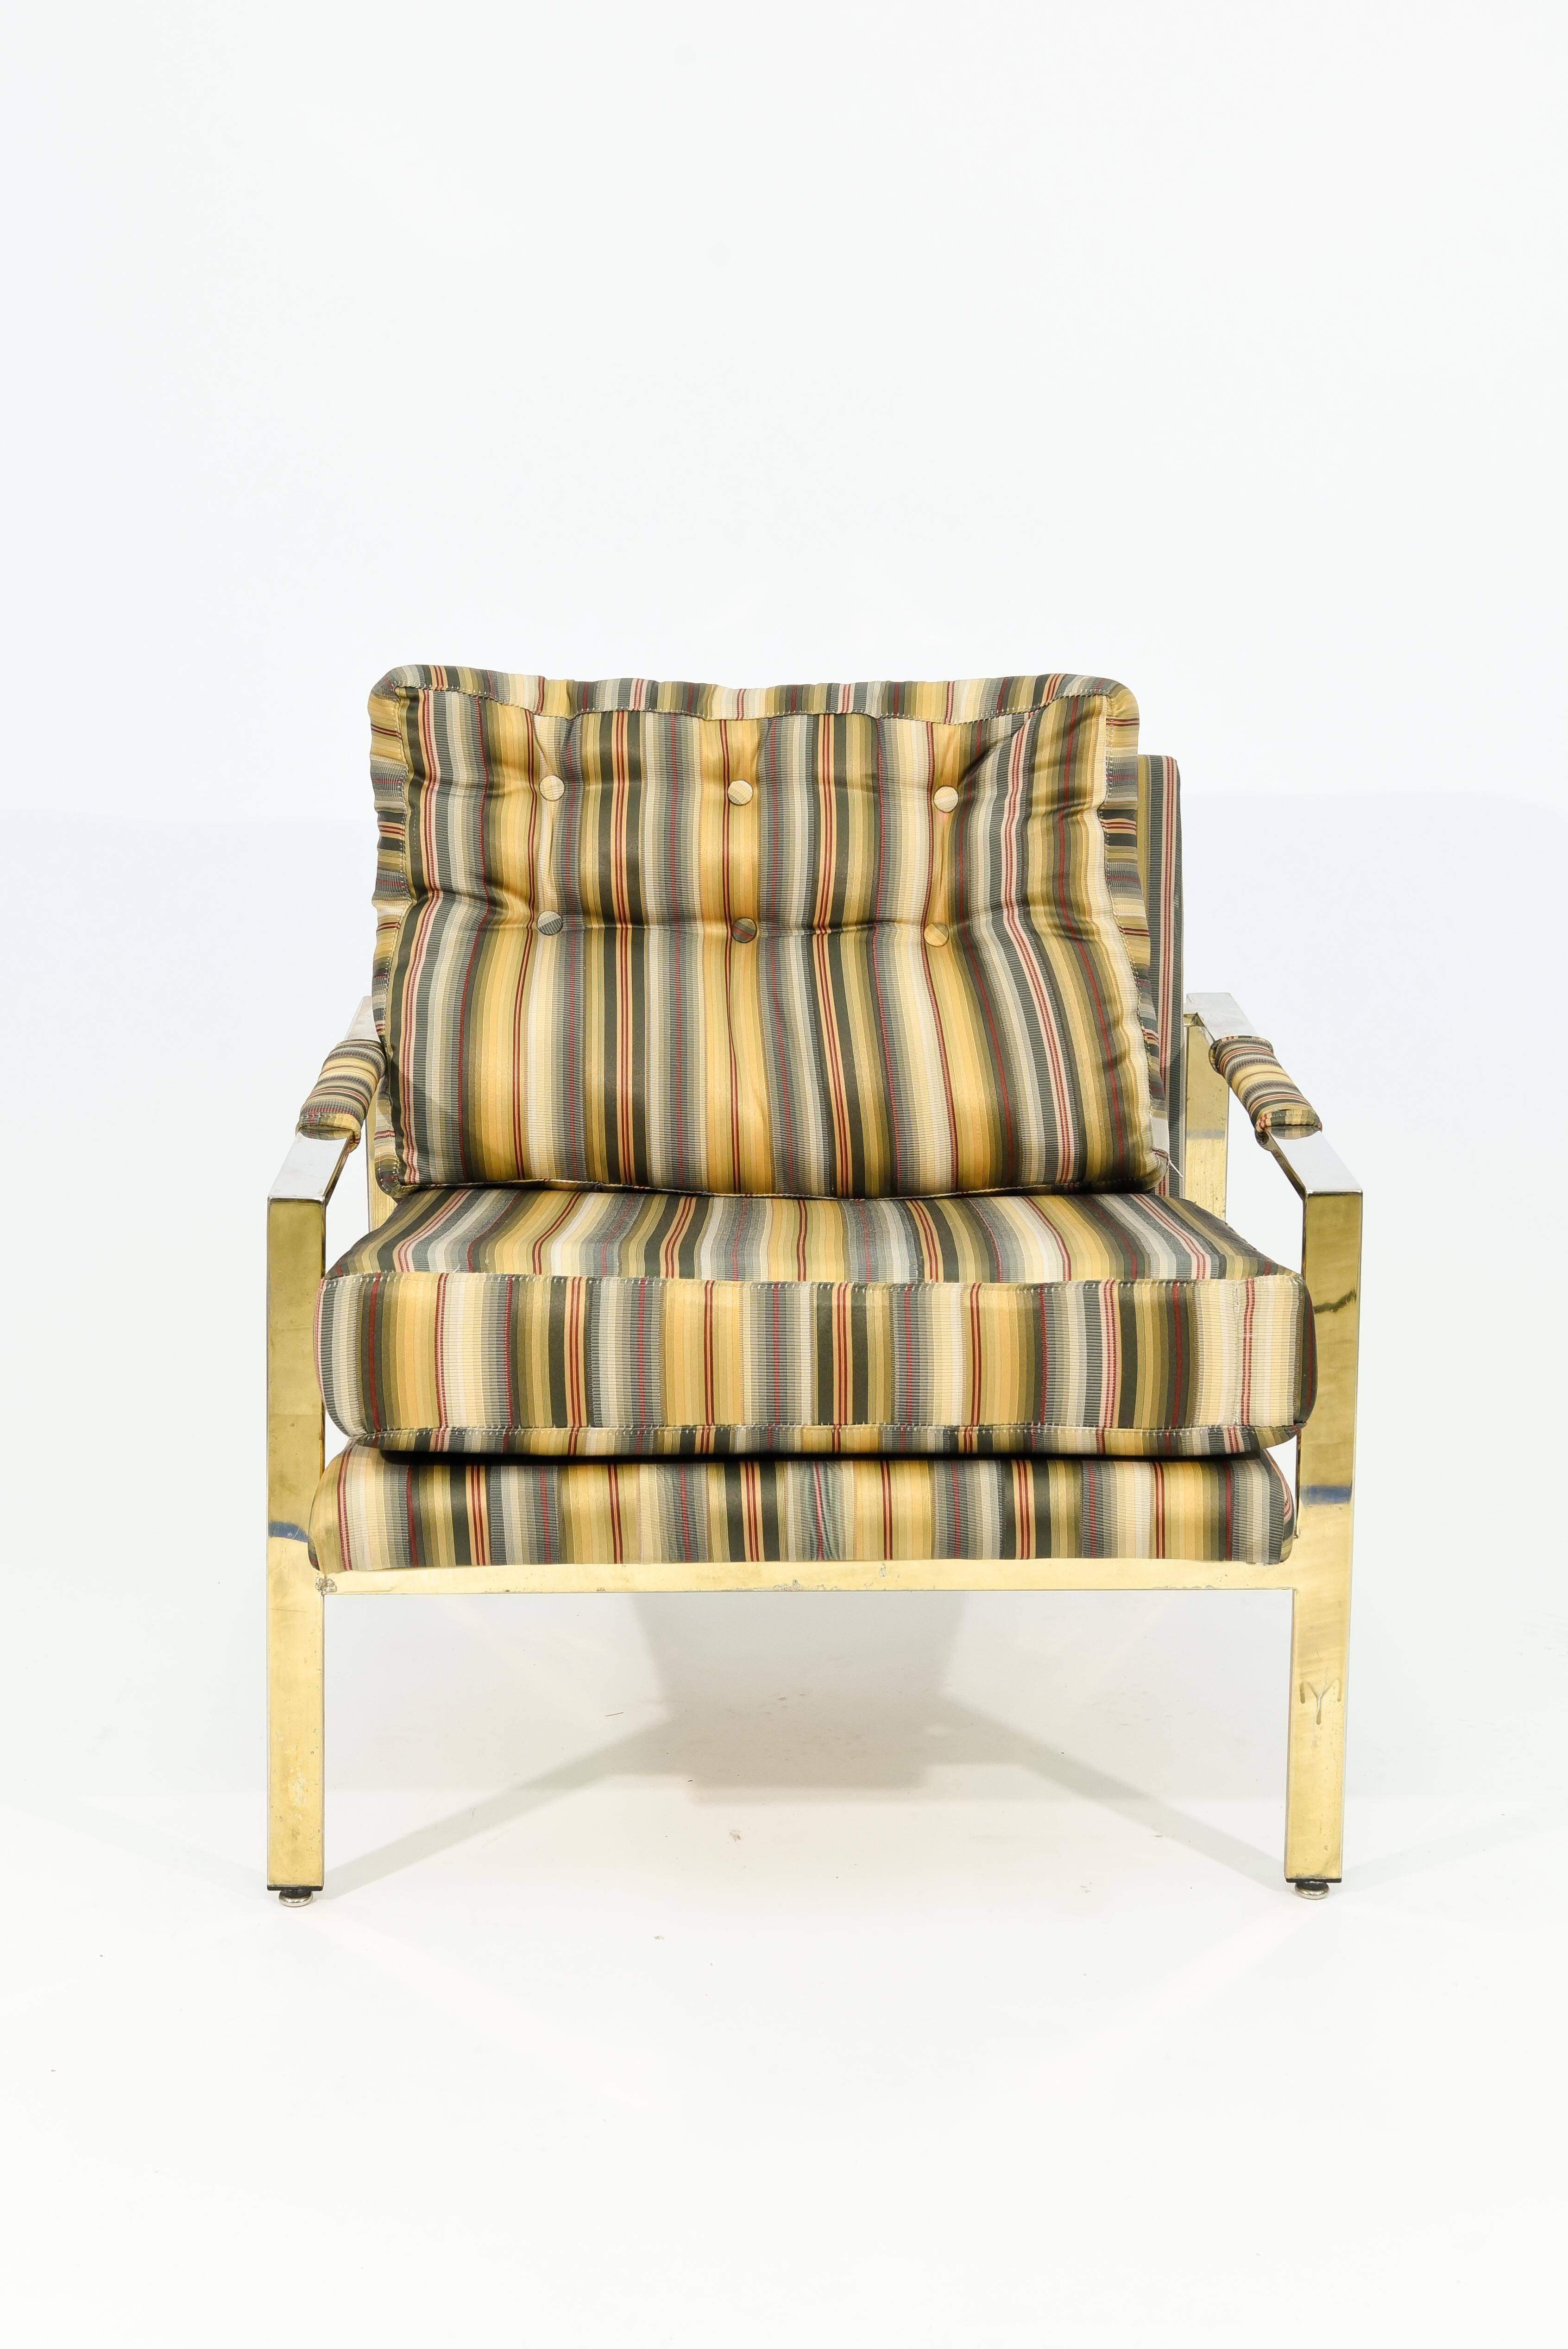 This chrome base lounge chair was designed in the 1970s by Milo Baughman for Thayer Coggin. Featuring retro upholstery and stunning chrome, this lounge chair makes for a comfortable and stylish seat.